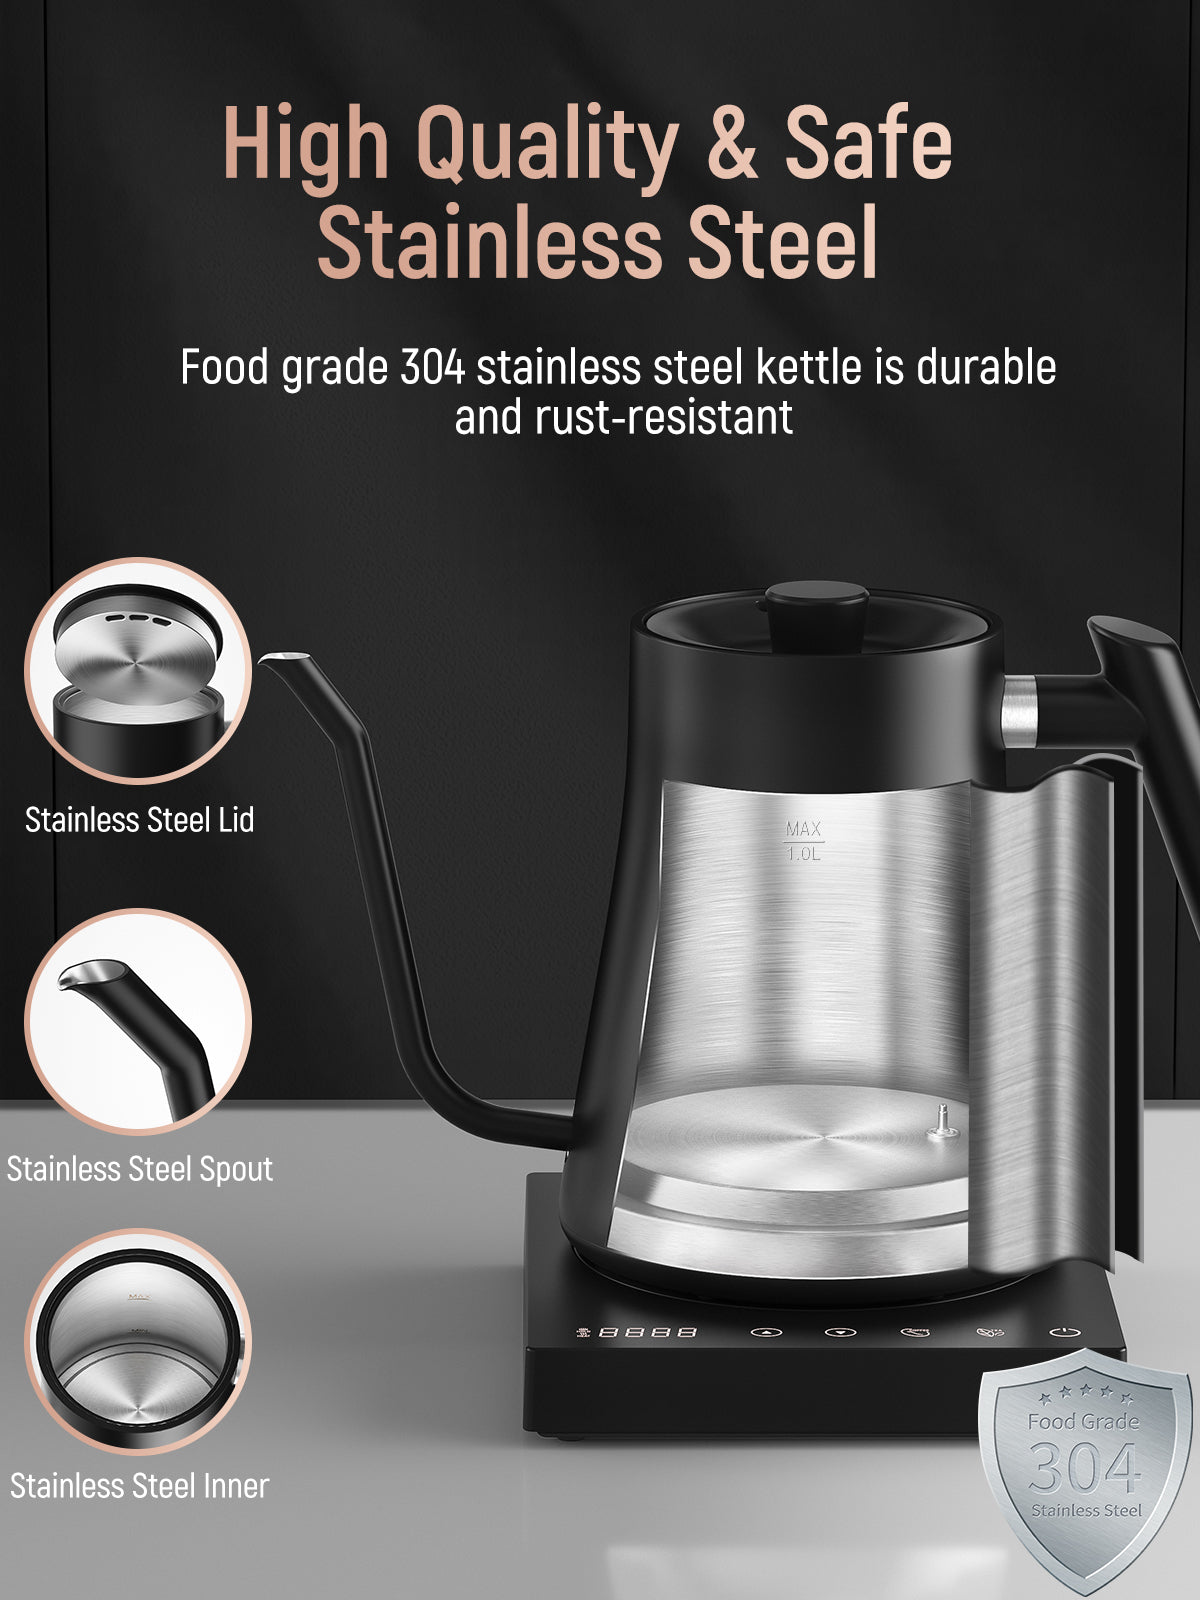 Gooseneck Electric Kettle Fabuletta 1500W Ultra Fast Boiling Water Kettle  100% Stainless Steel for Pour-over Coffee & Tea Leak-Proof Design French